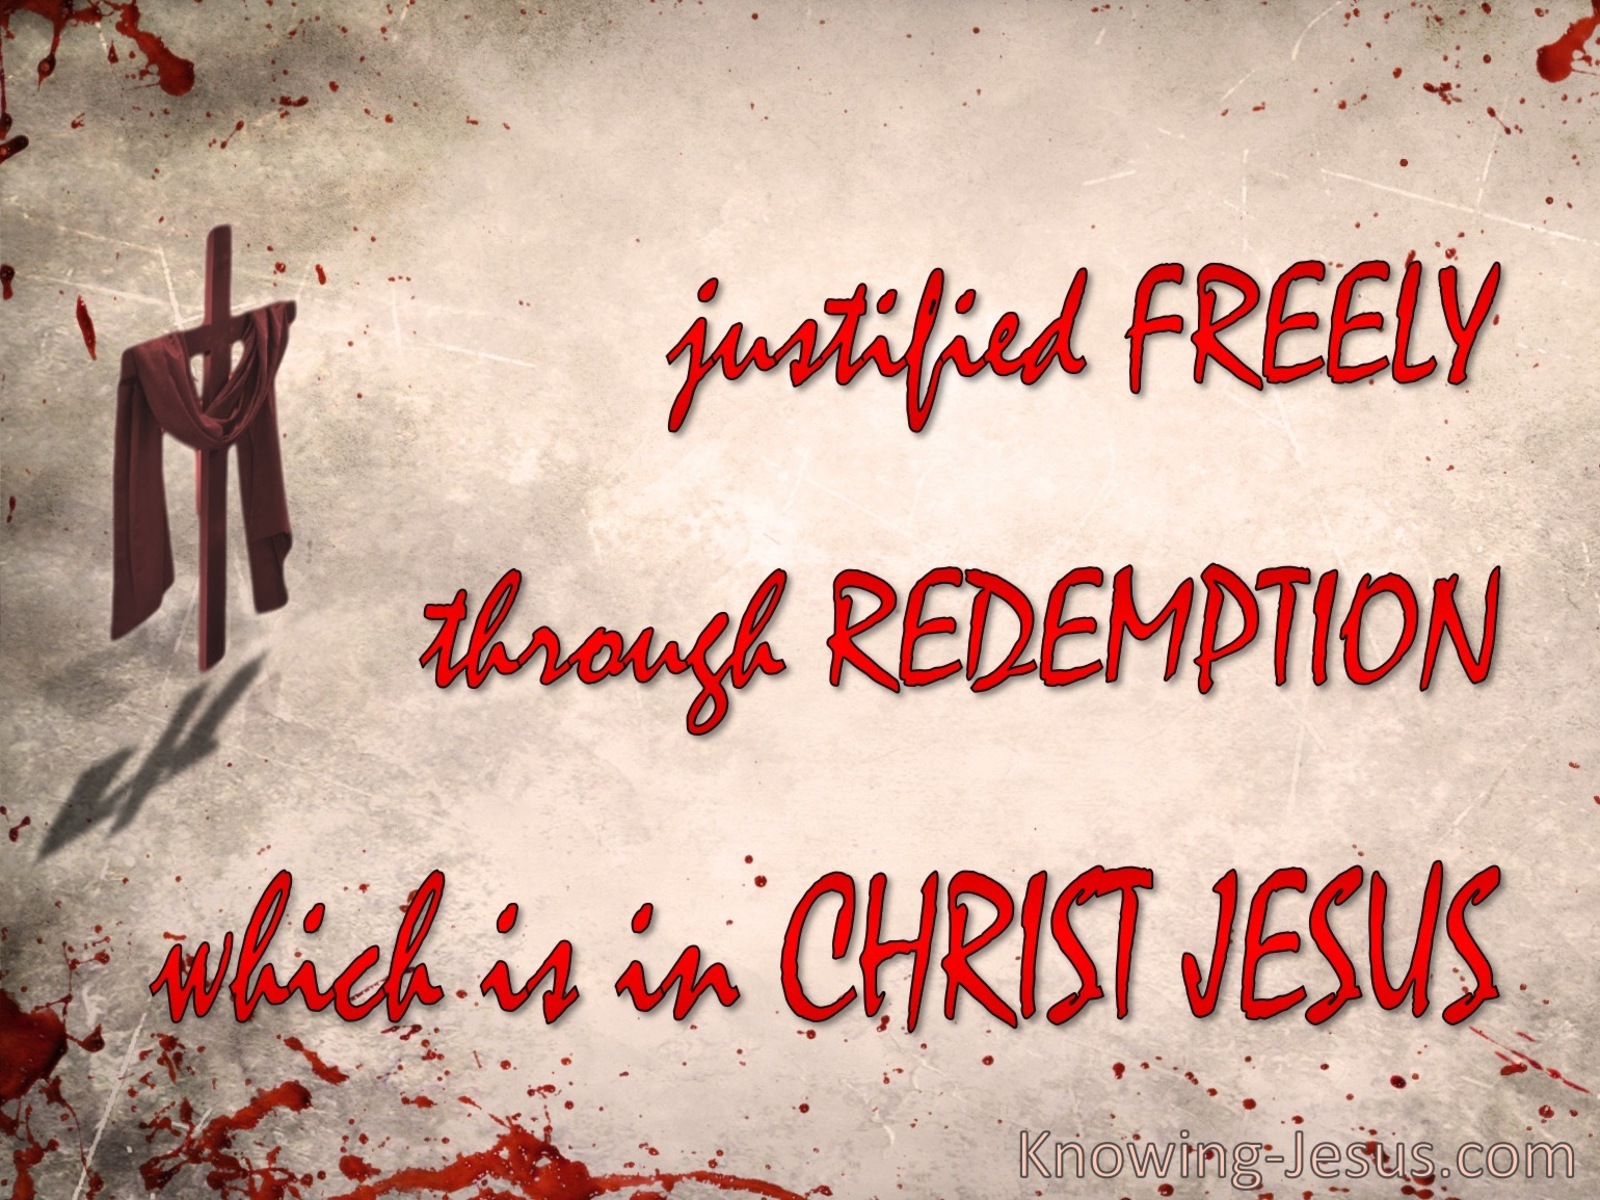 Romans 3:24 Justified Freely Through Redemption (red)